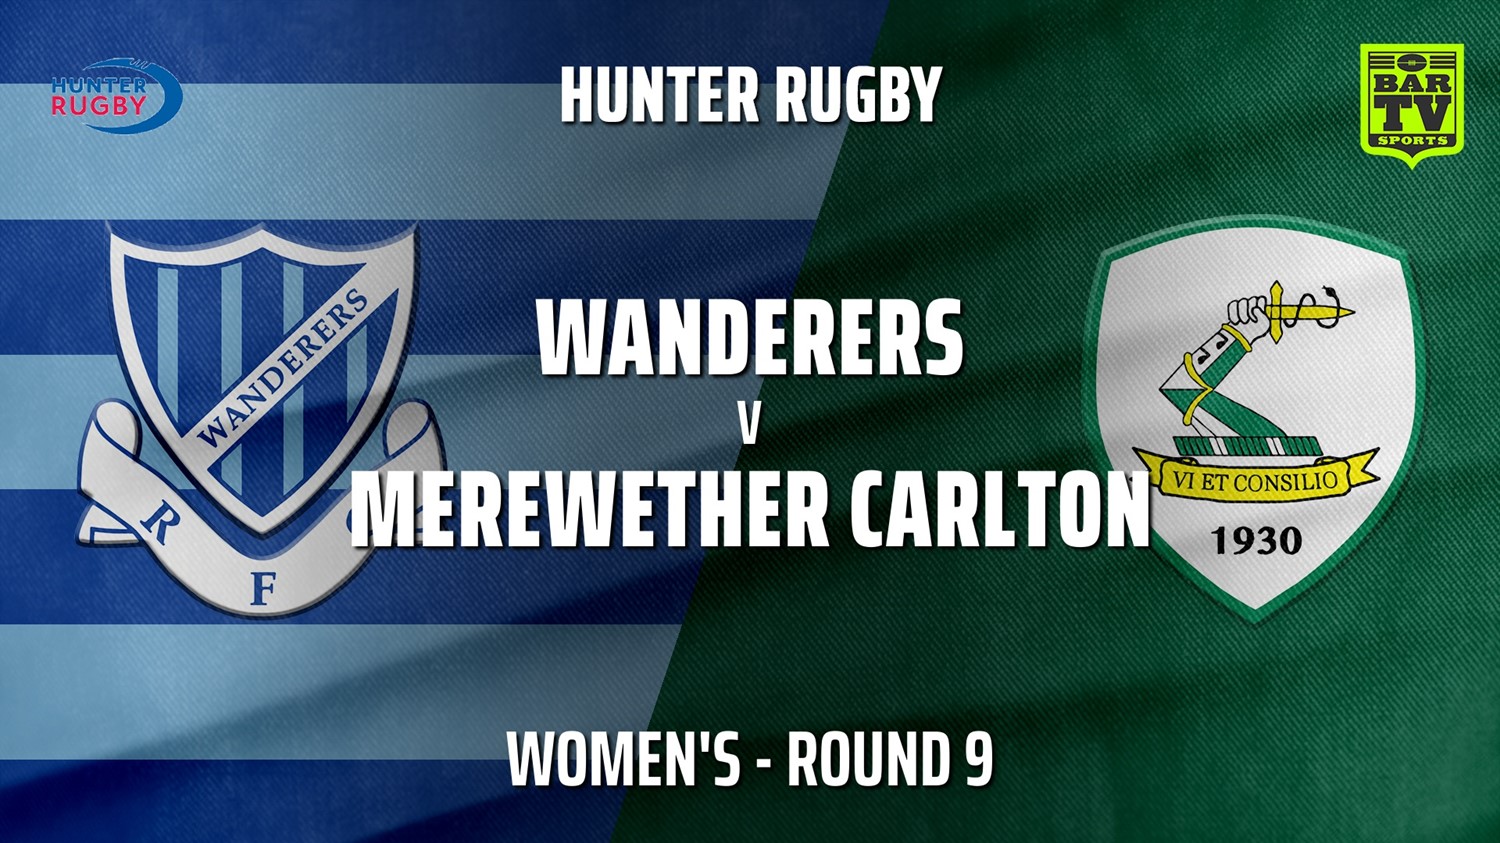 210619-Hunter Rugby Round 9 - Women's - Wanderers v Merewether Carlton Slate Image